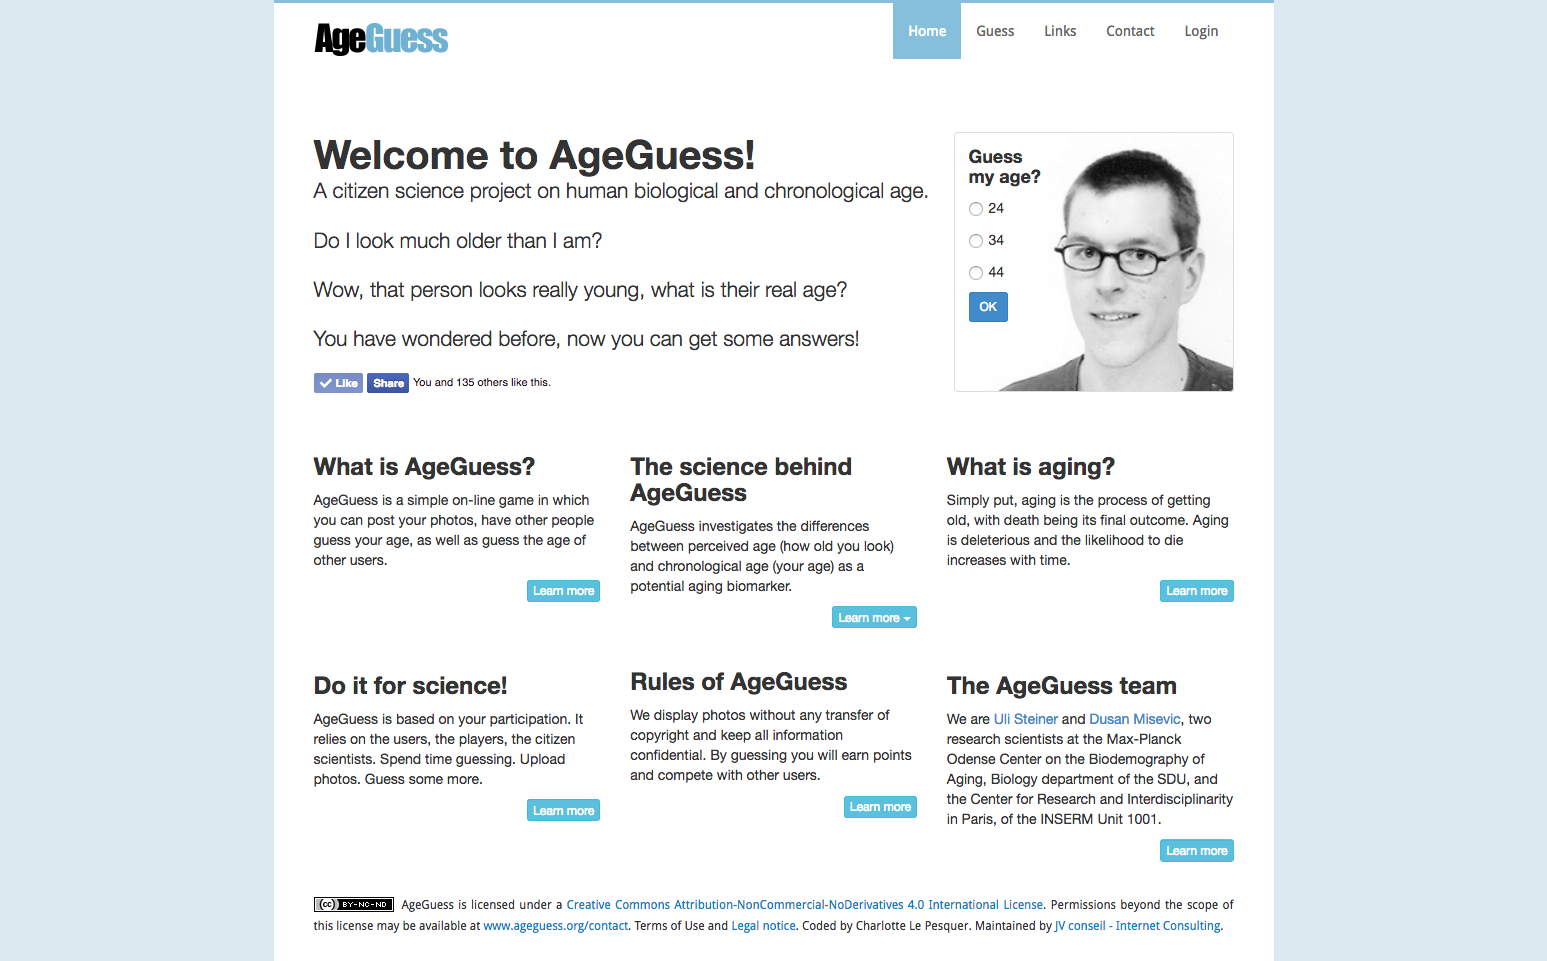 How Old I Look? AgeGuess a citizen science project on human biological and chronological age | AgeGuess